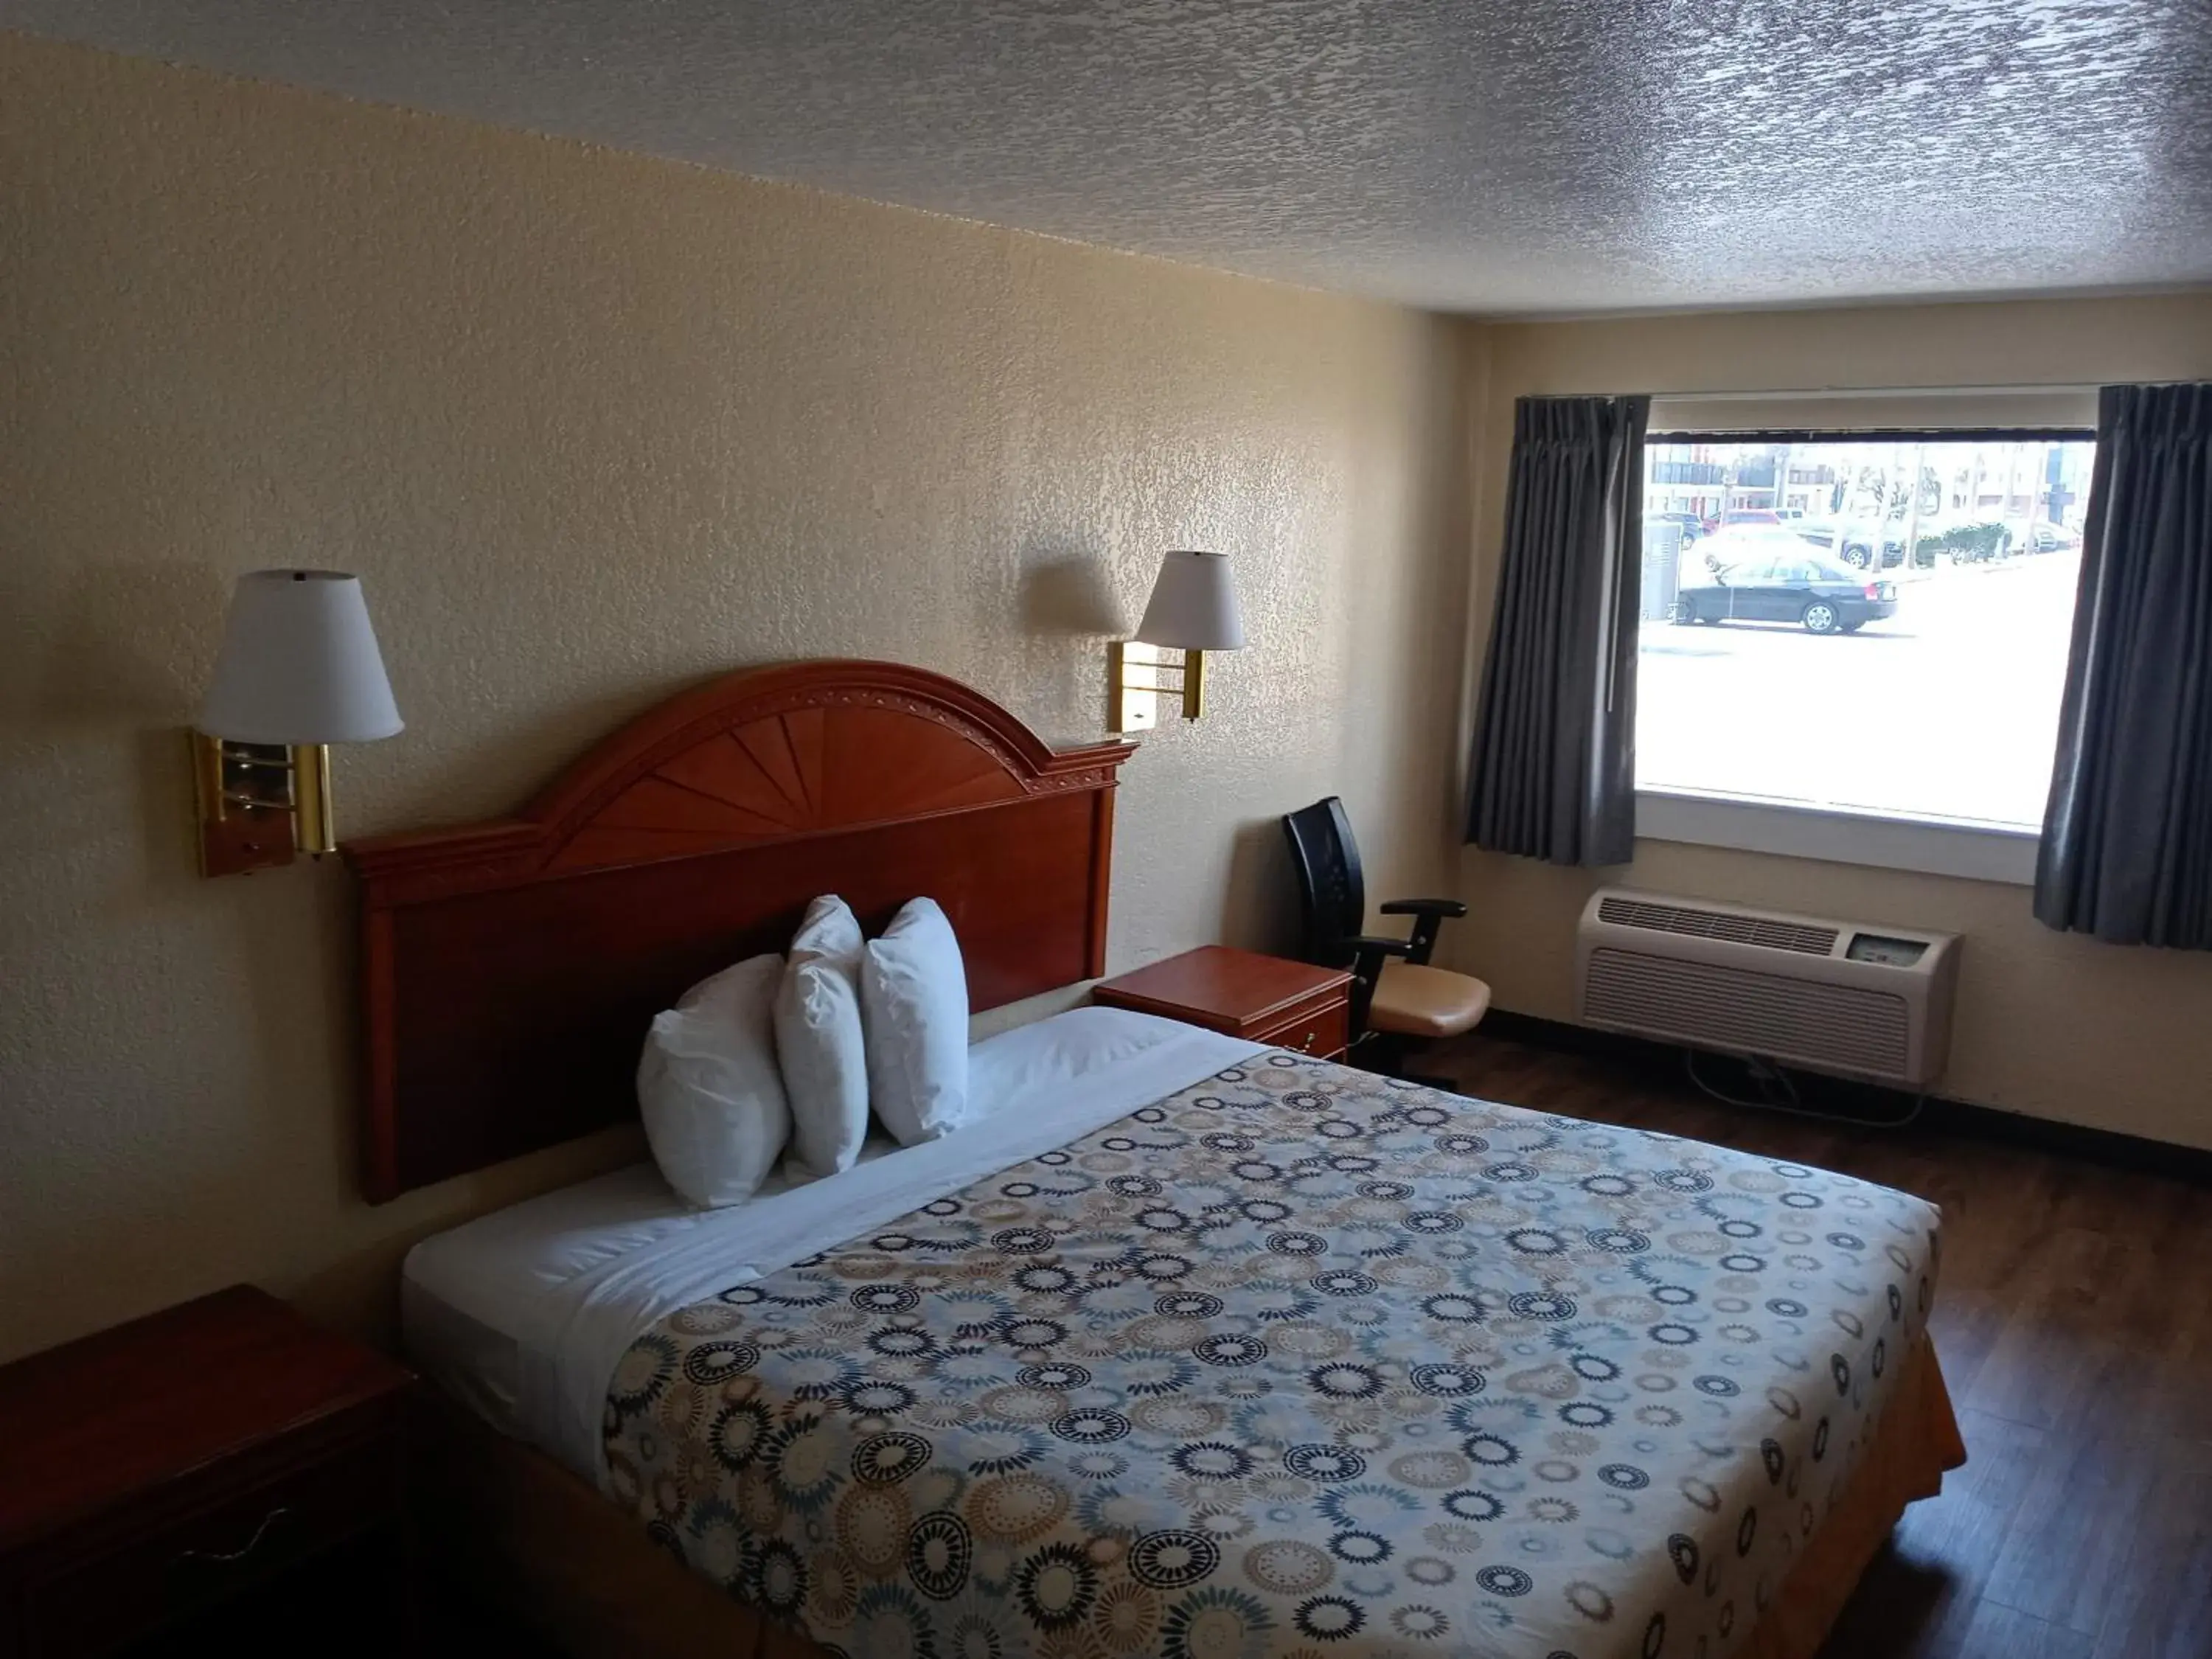 Bedroom, Bed in Hole Inn the Wall Hotel - Sunset Plaza - Fort Walton Beach